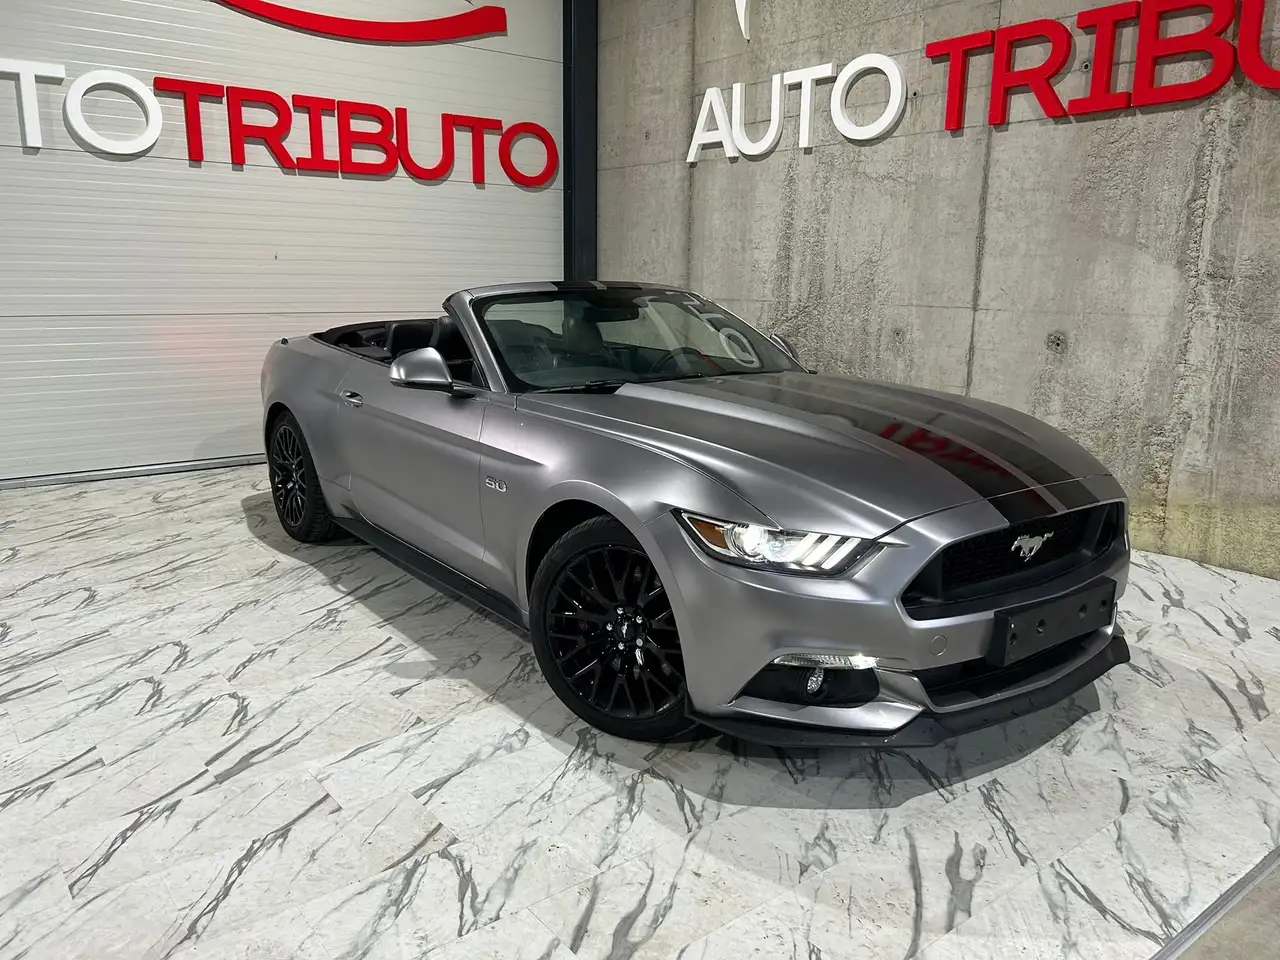 2016 - Ford Mustang Mustang Boîte automatique Cabriolet